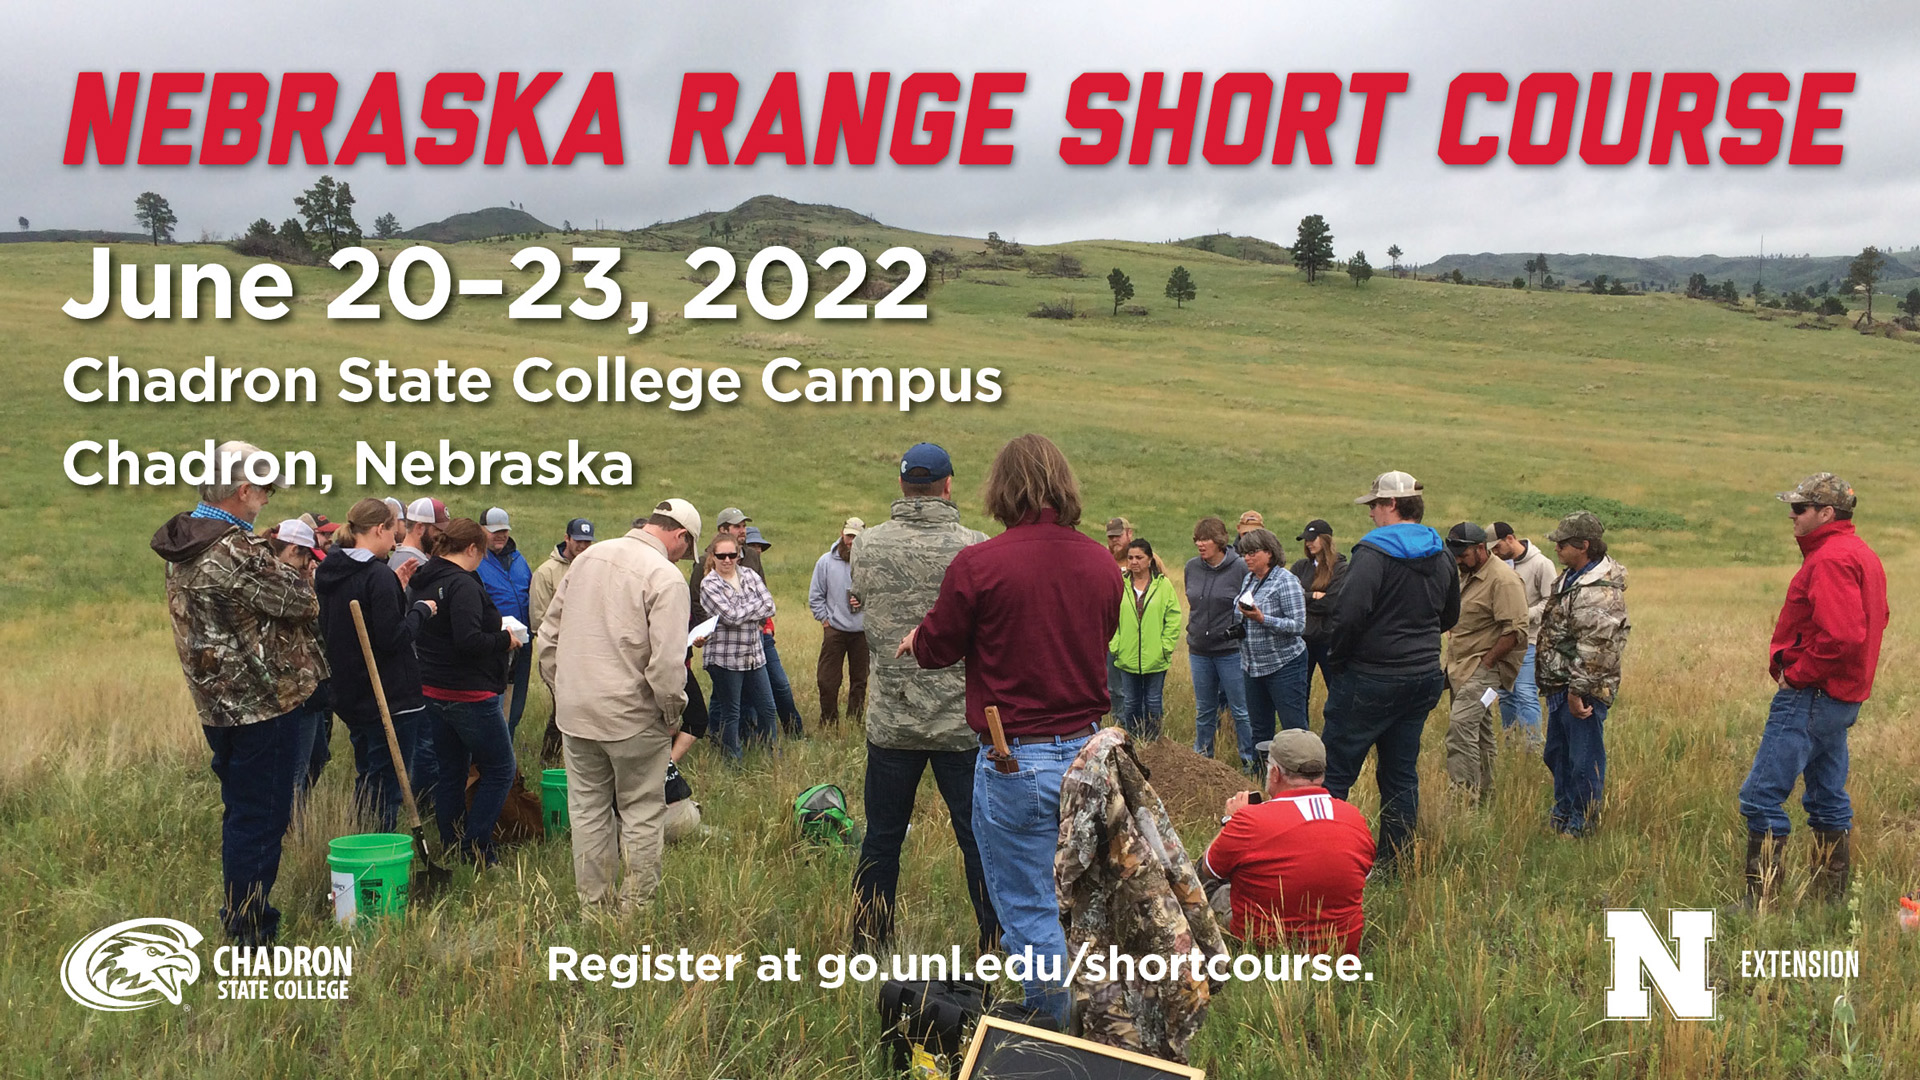 The Nebraska Range Short Course will be held at Chadron State College June 20–23.